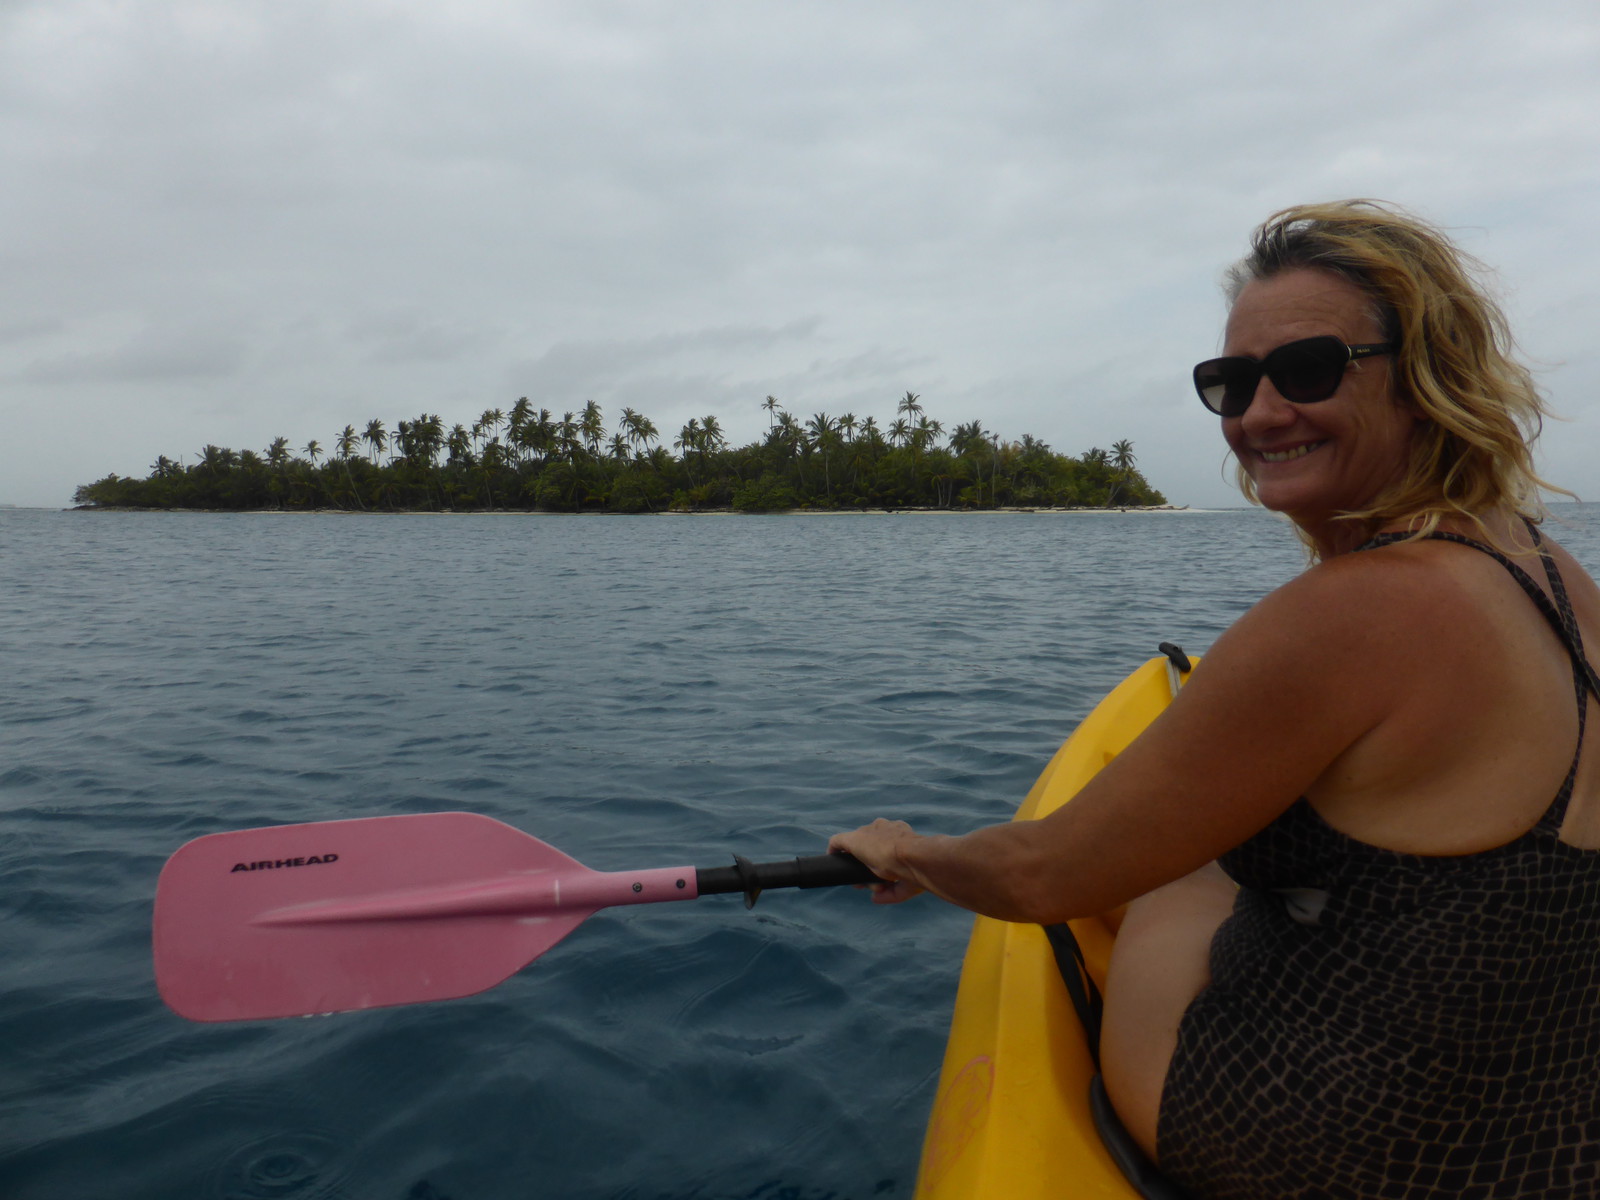 Kayaking in the Cayos Holandeses